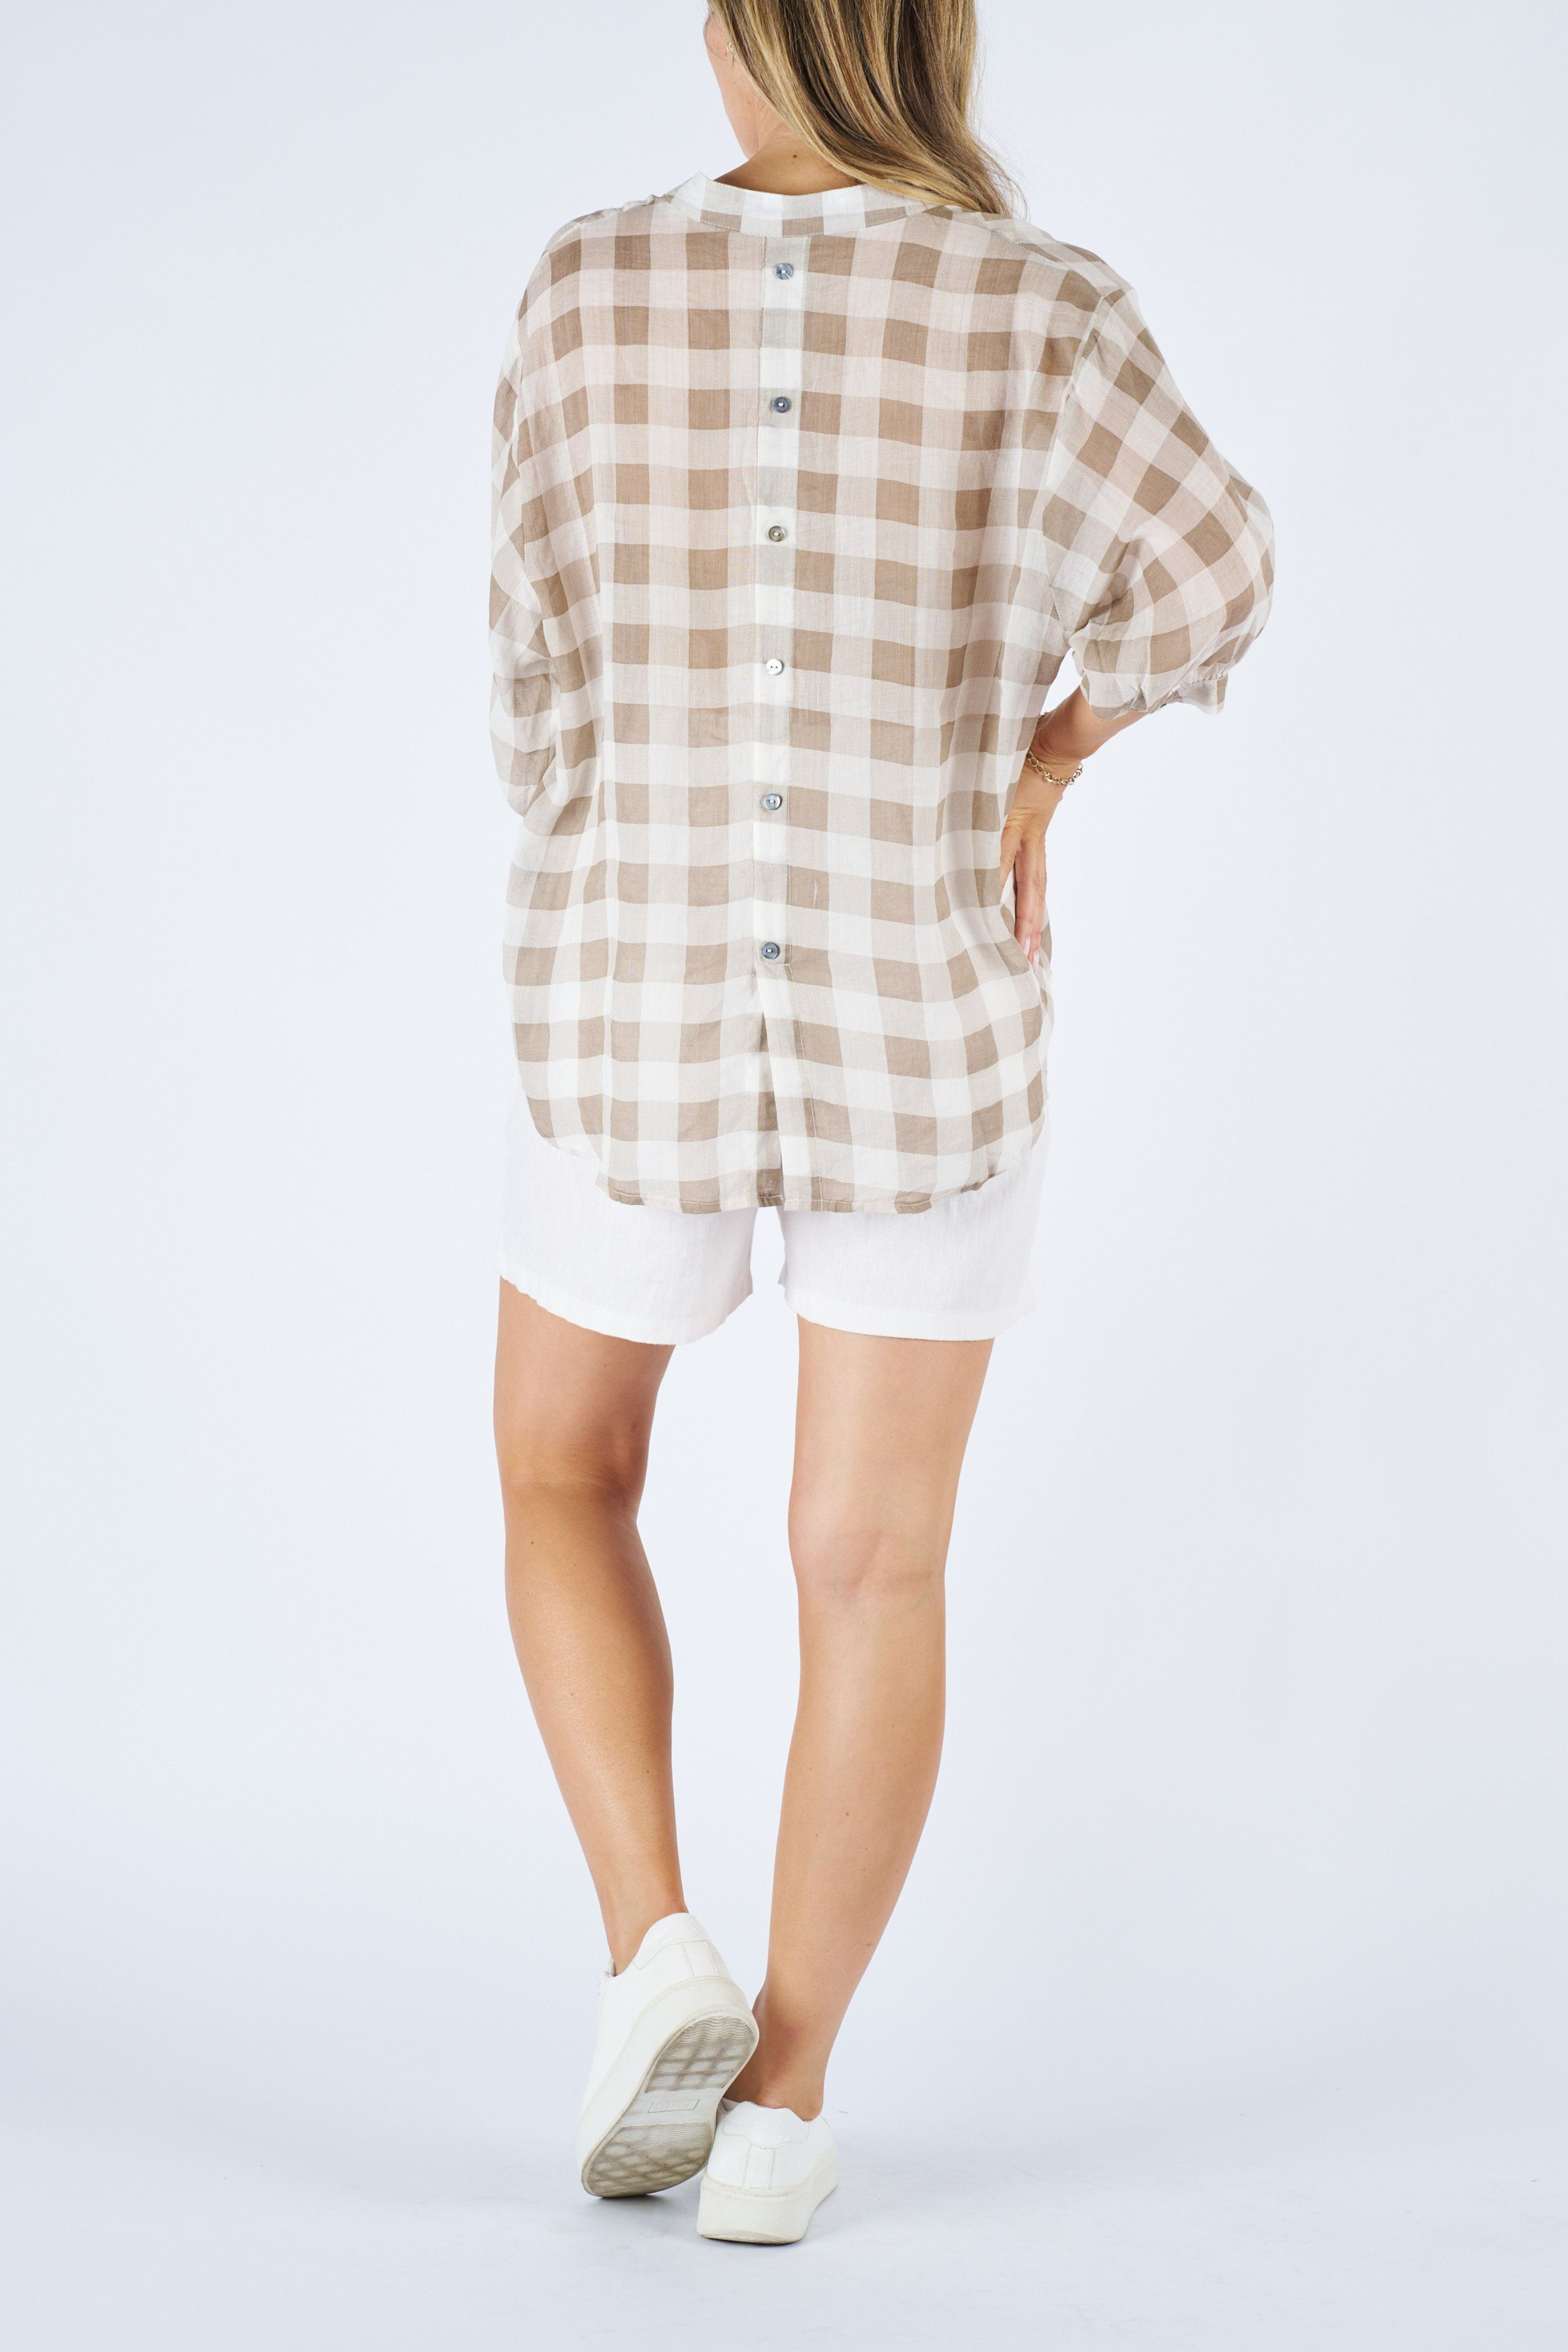 CHARLIE Top in Beige and White Check